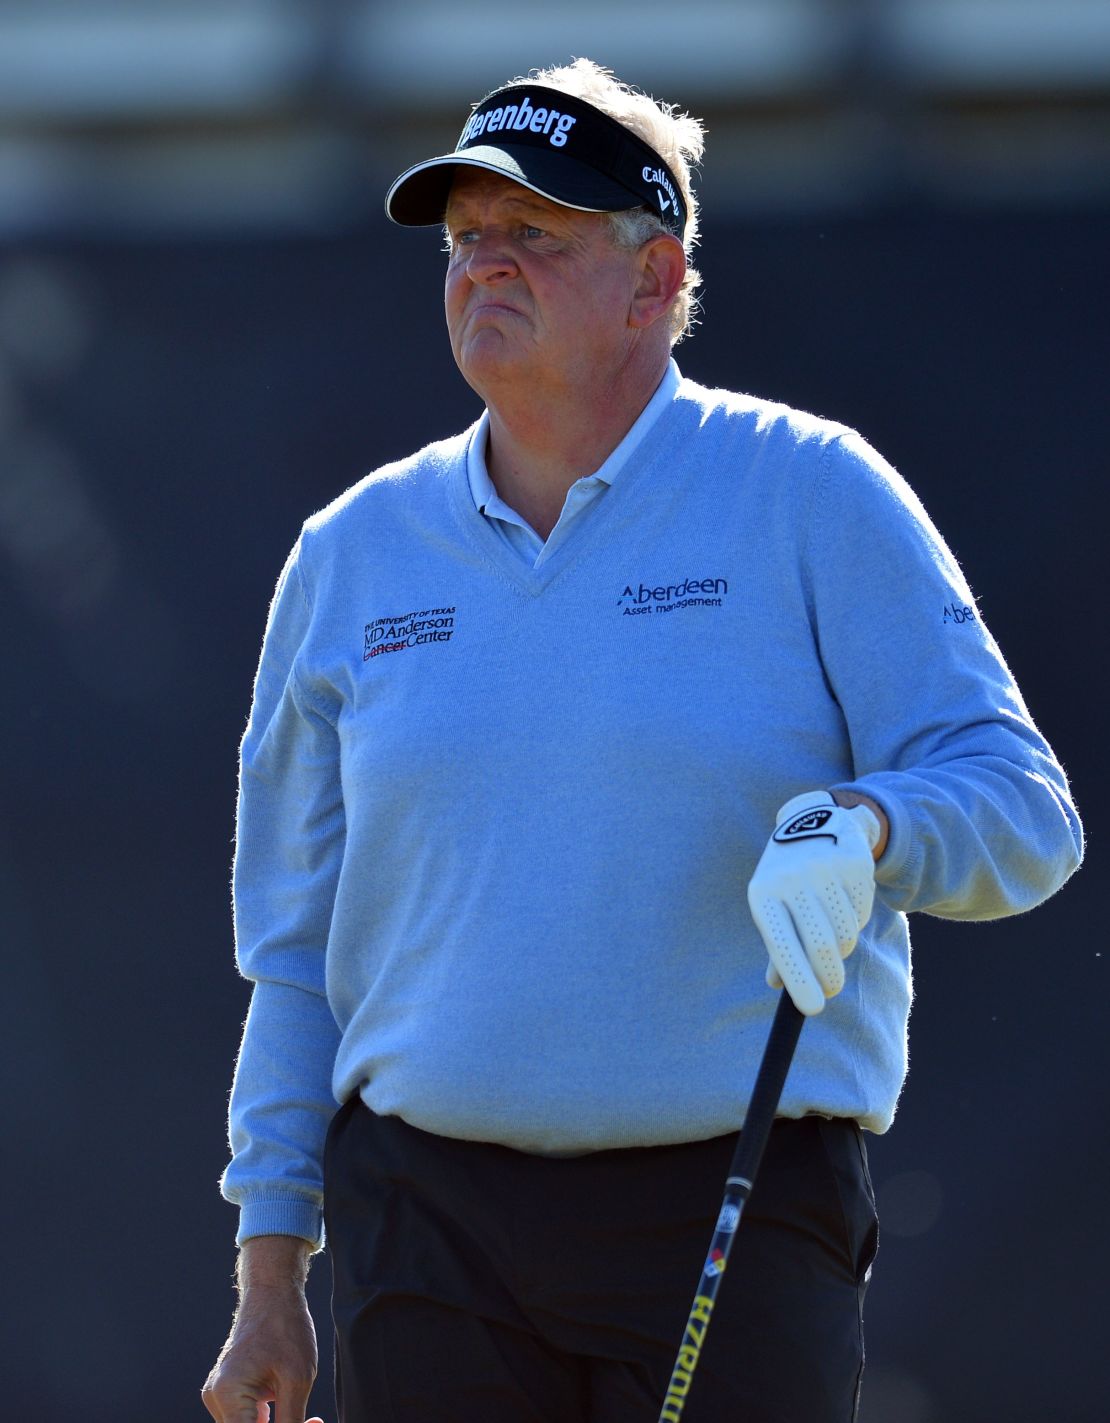 Colin Montgomerie says changes need to be made to reduce the drive distance that players like DeChambeau are able to achieve.